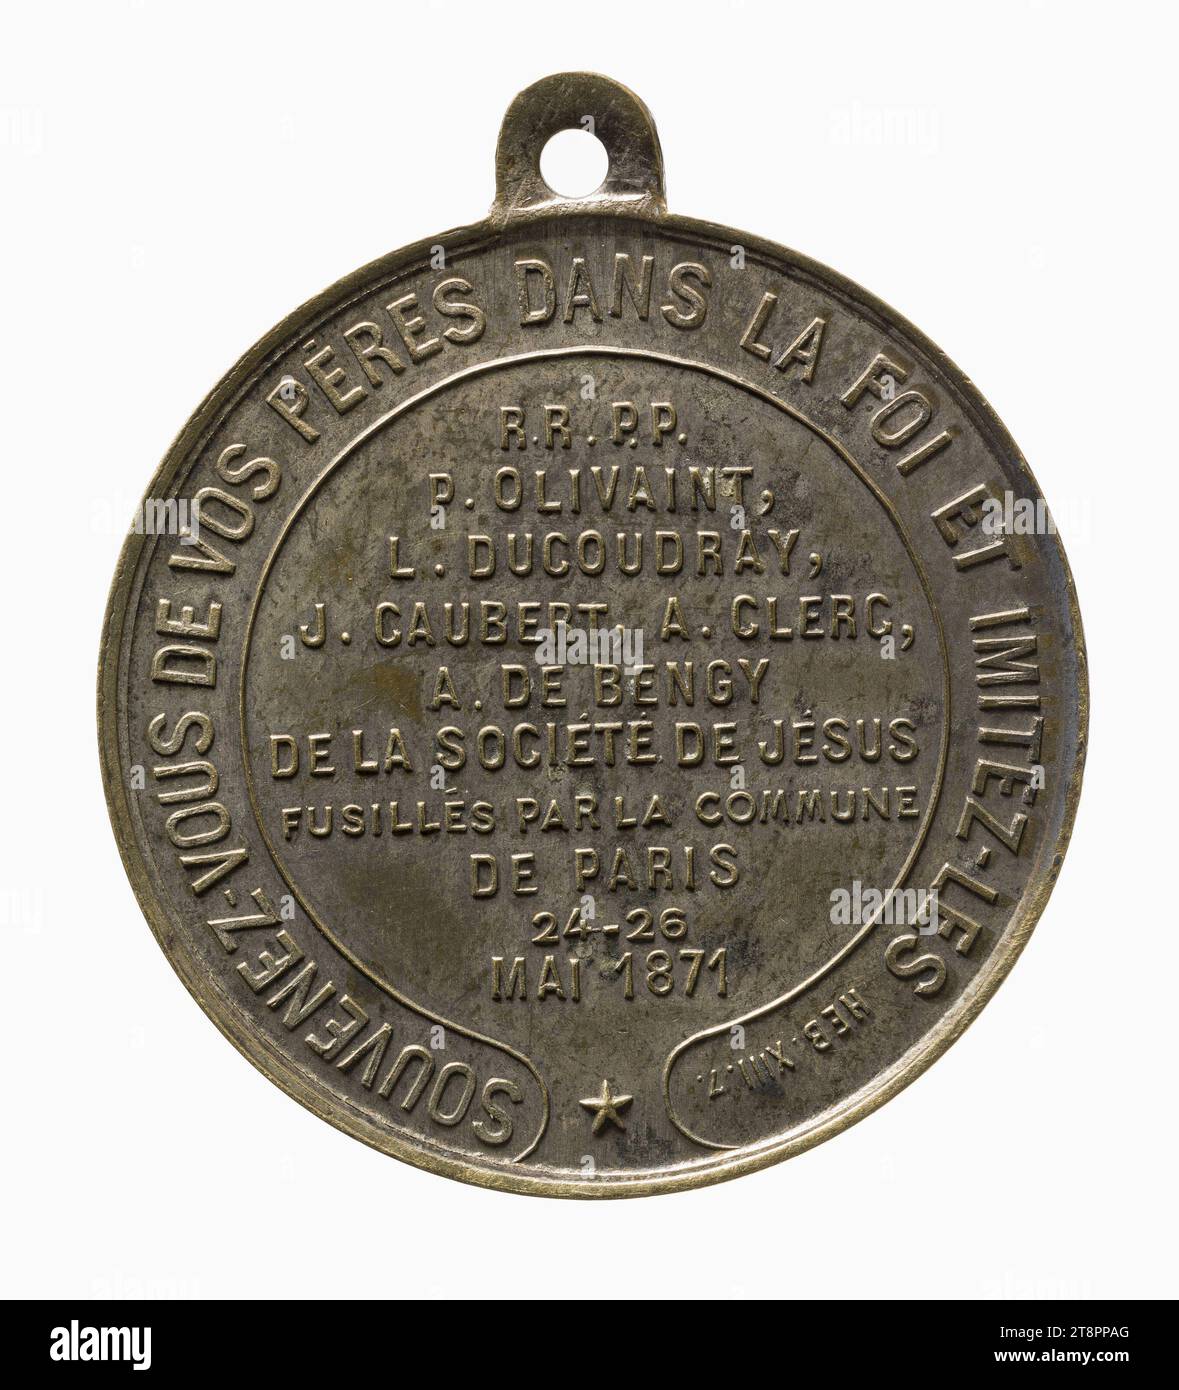 Members of the Society of Jesus shot by the Paris Commune, May 24-26, 1871, Anger (Monsieur), Editor, In 1871, Numismatic, Medal, Copper, Silver plated = silver plating, Dimensions - Work: Diameter: 2.7 cm, Weight (type dimension): 6.7 g Stock Photo